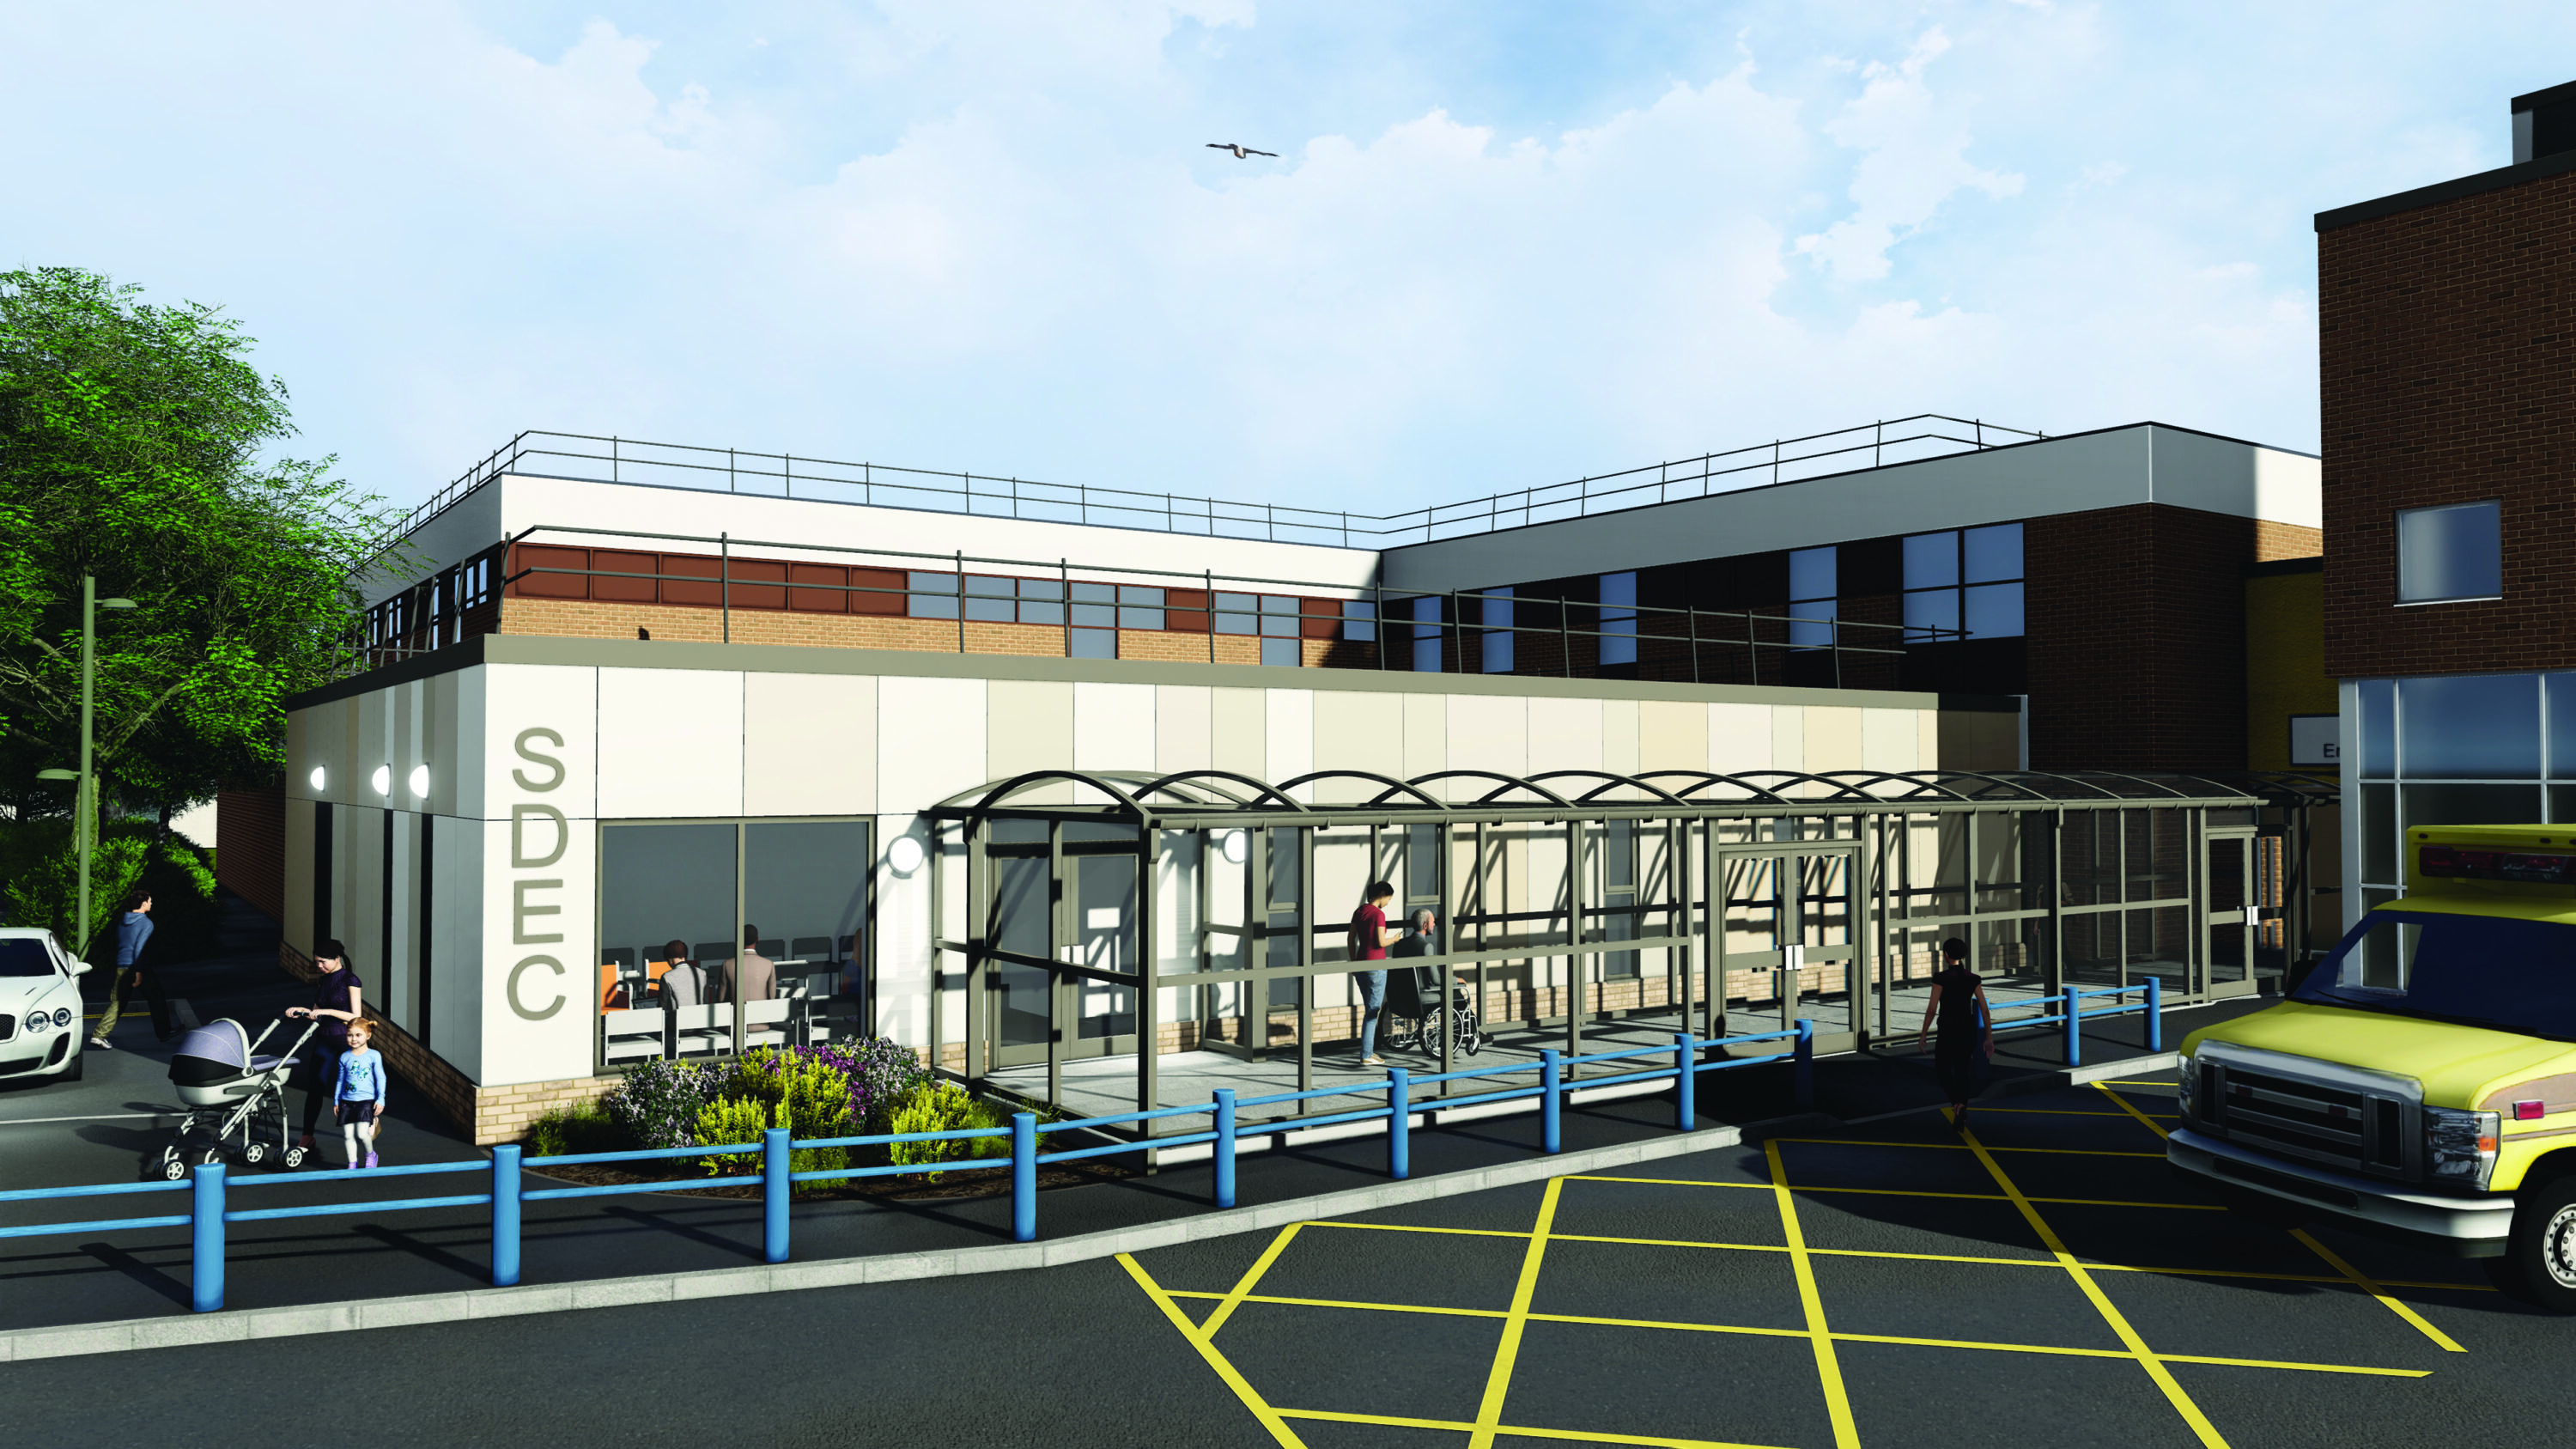 An architectural render of the SDEC building, showing the main front elevation with a long covered ramp leading to the main entrance.